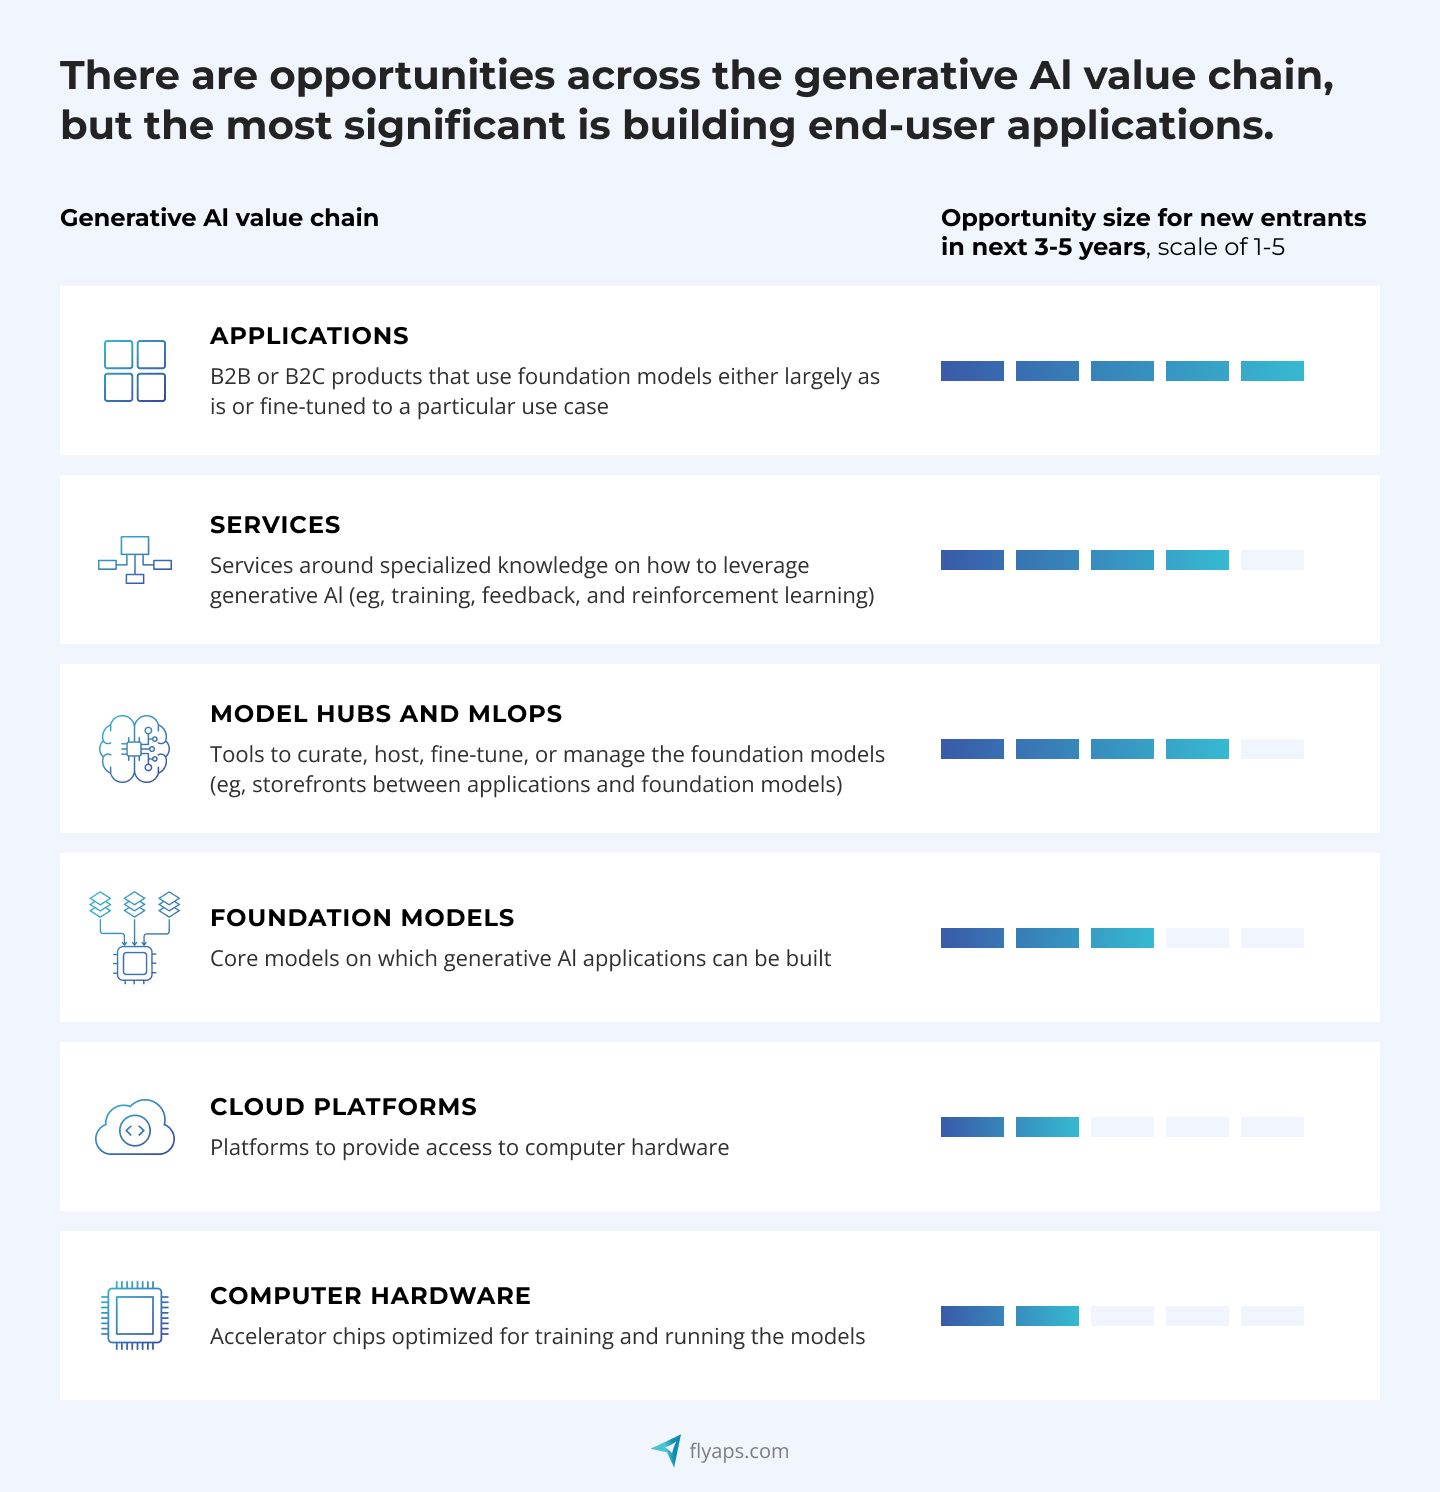 McKinsey research on the generative AI value chain